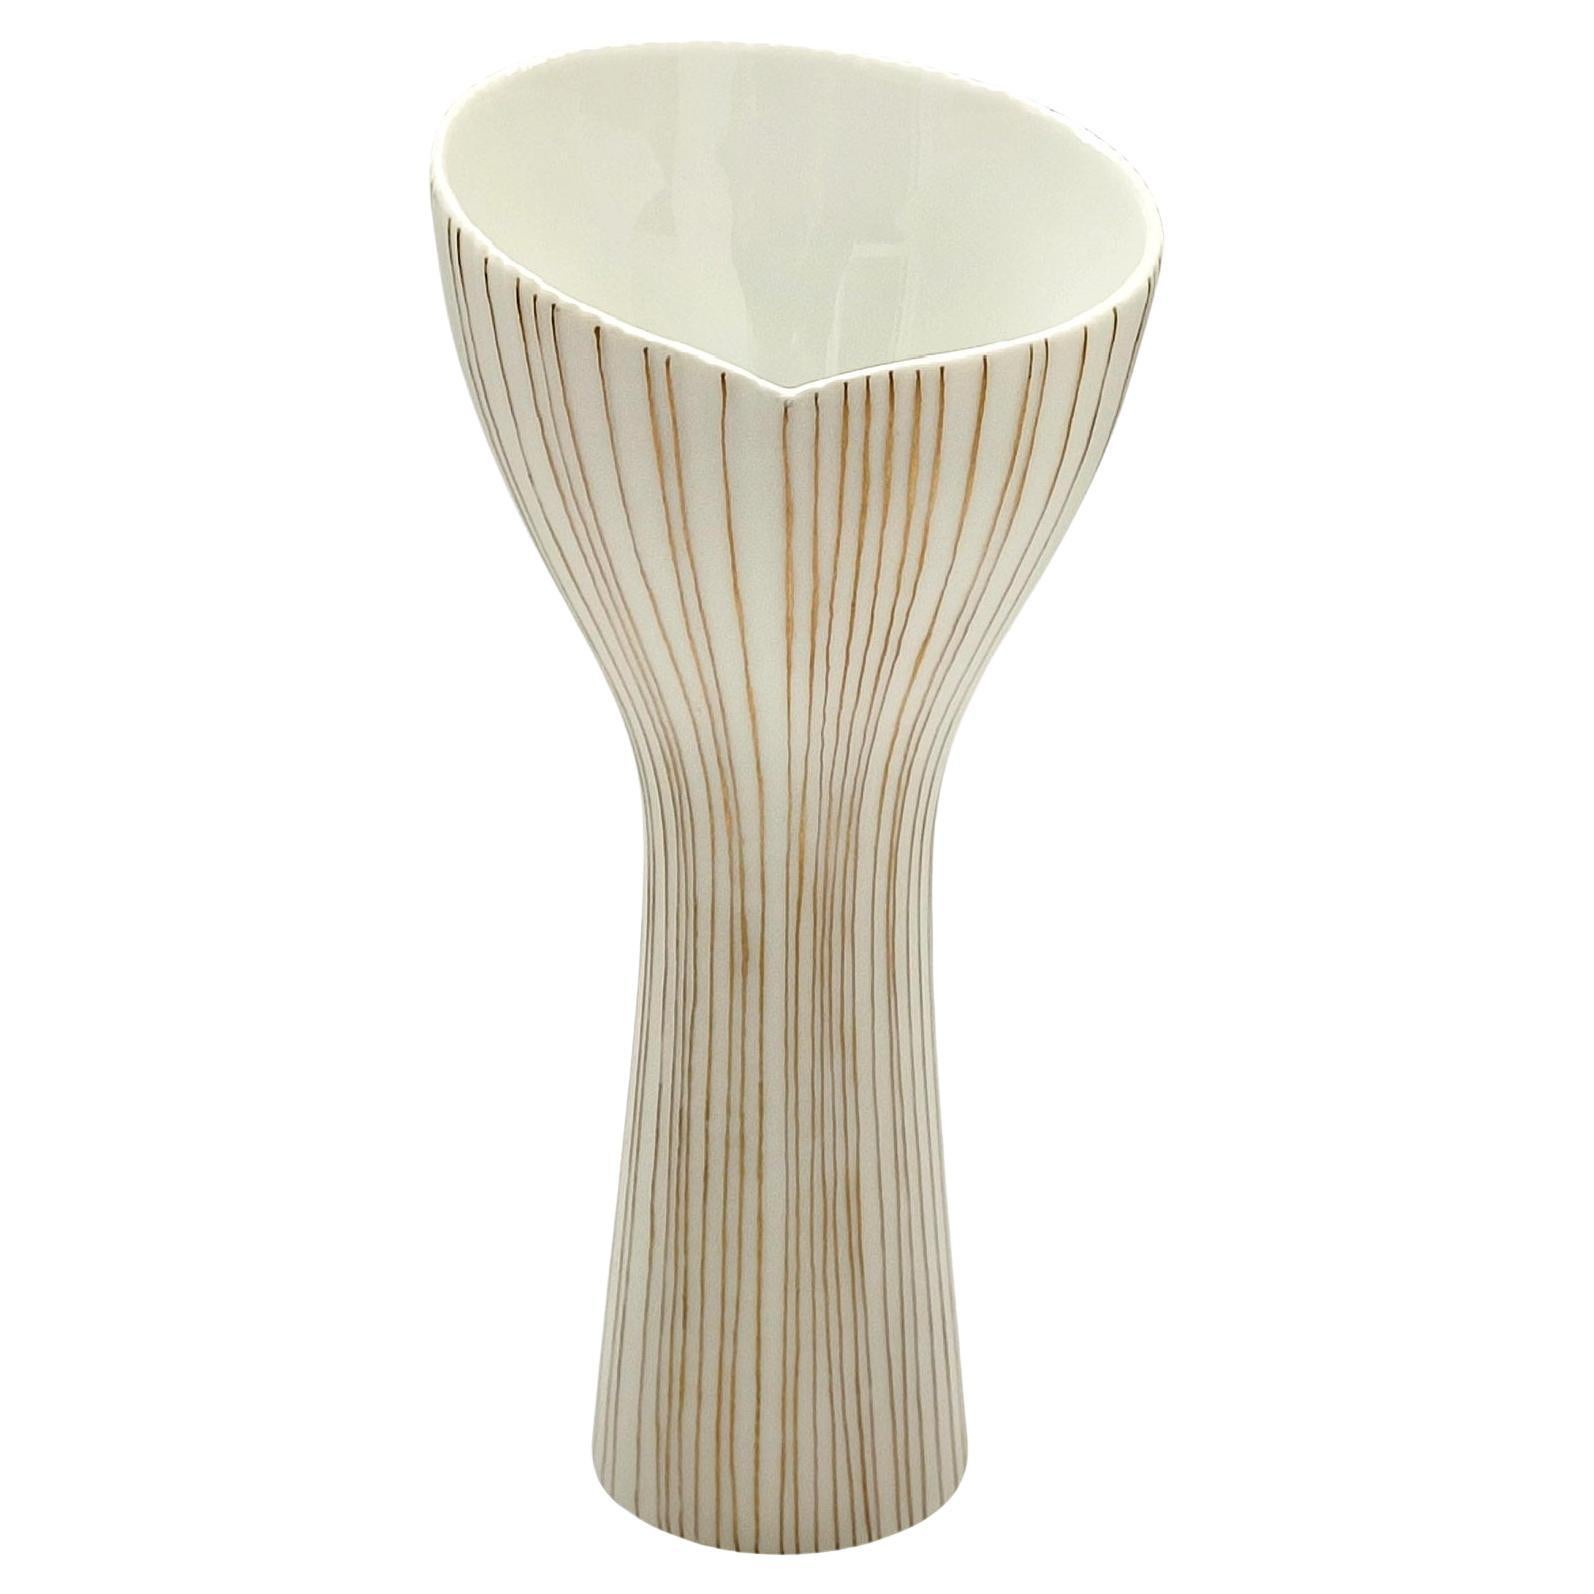 Tapio Wirkkala for Rosenthal Porcelain Wide Mouth Vase, Western Germany, 1960s For Sale